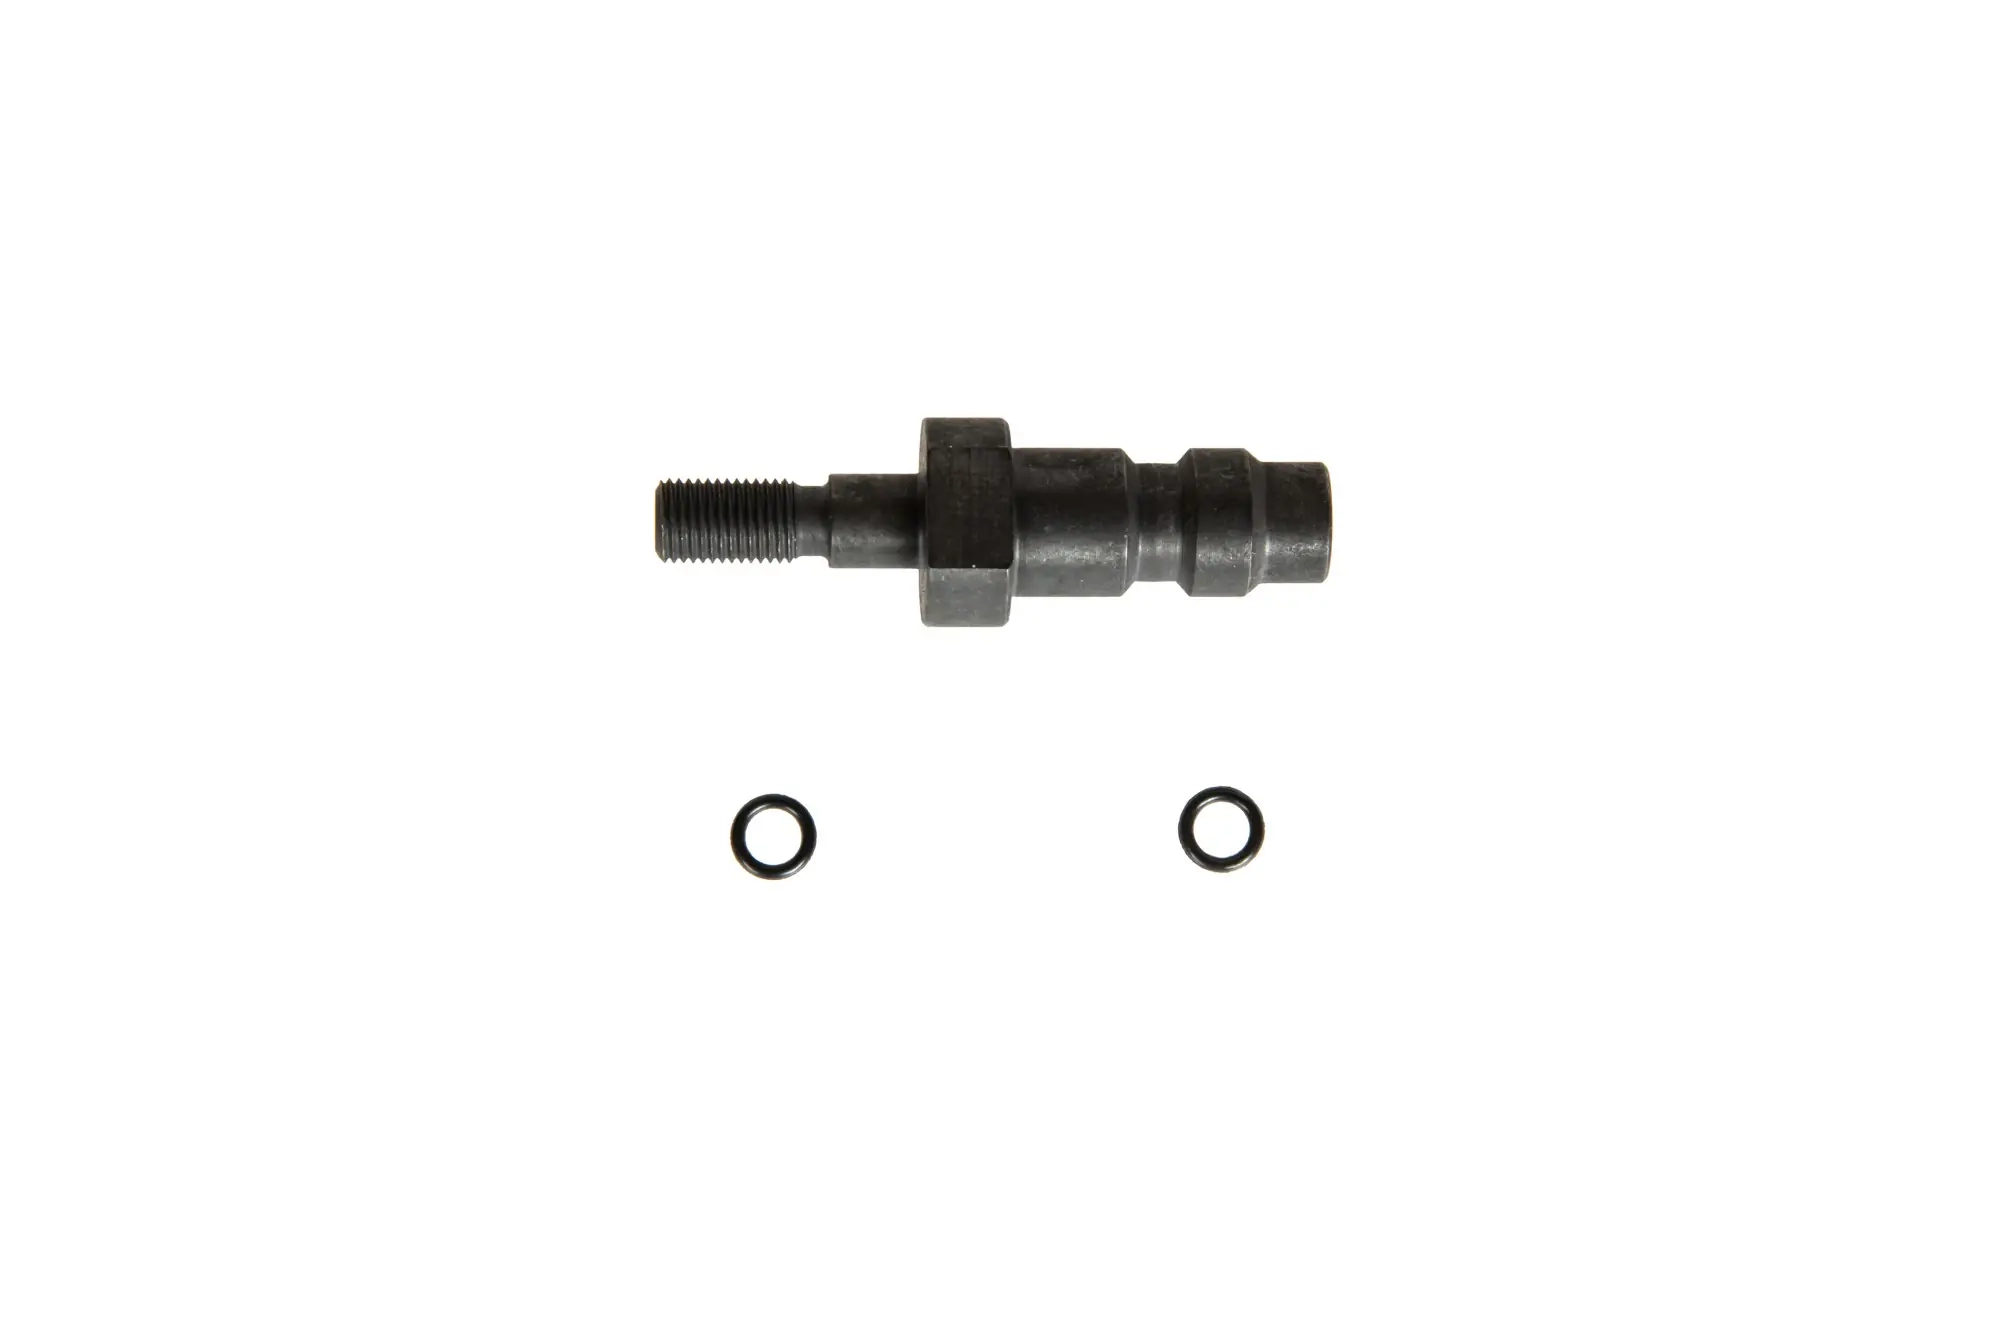 EPeS Airsoft HPA adaptor - type TM/TW